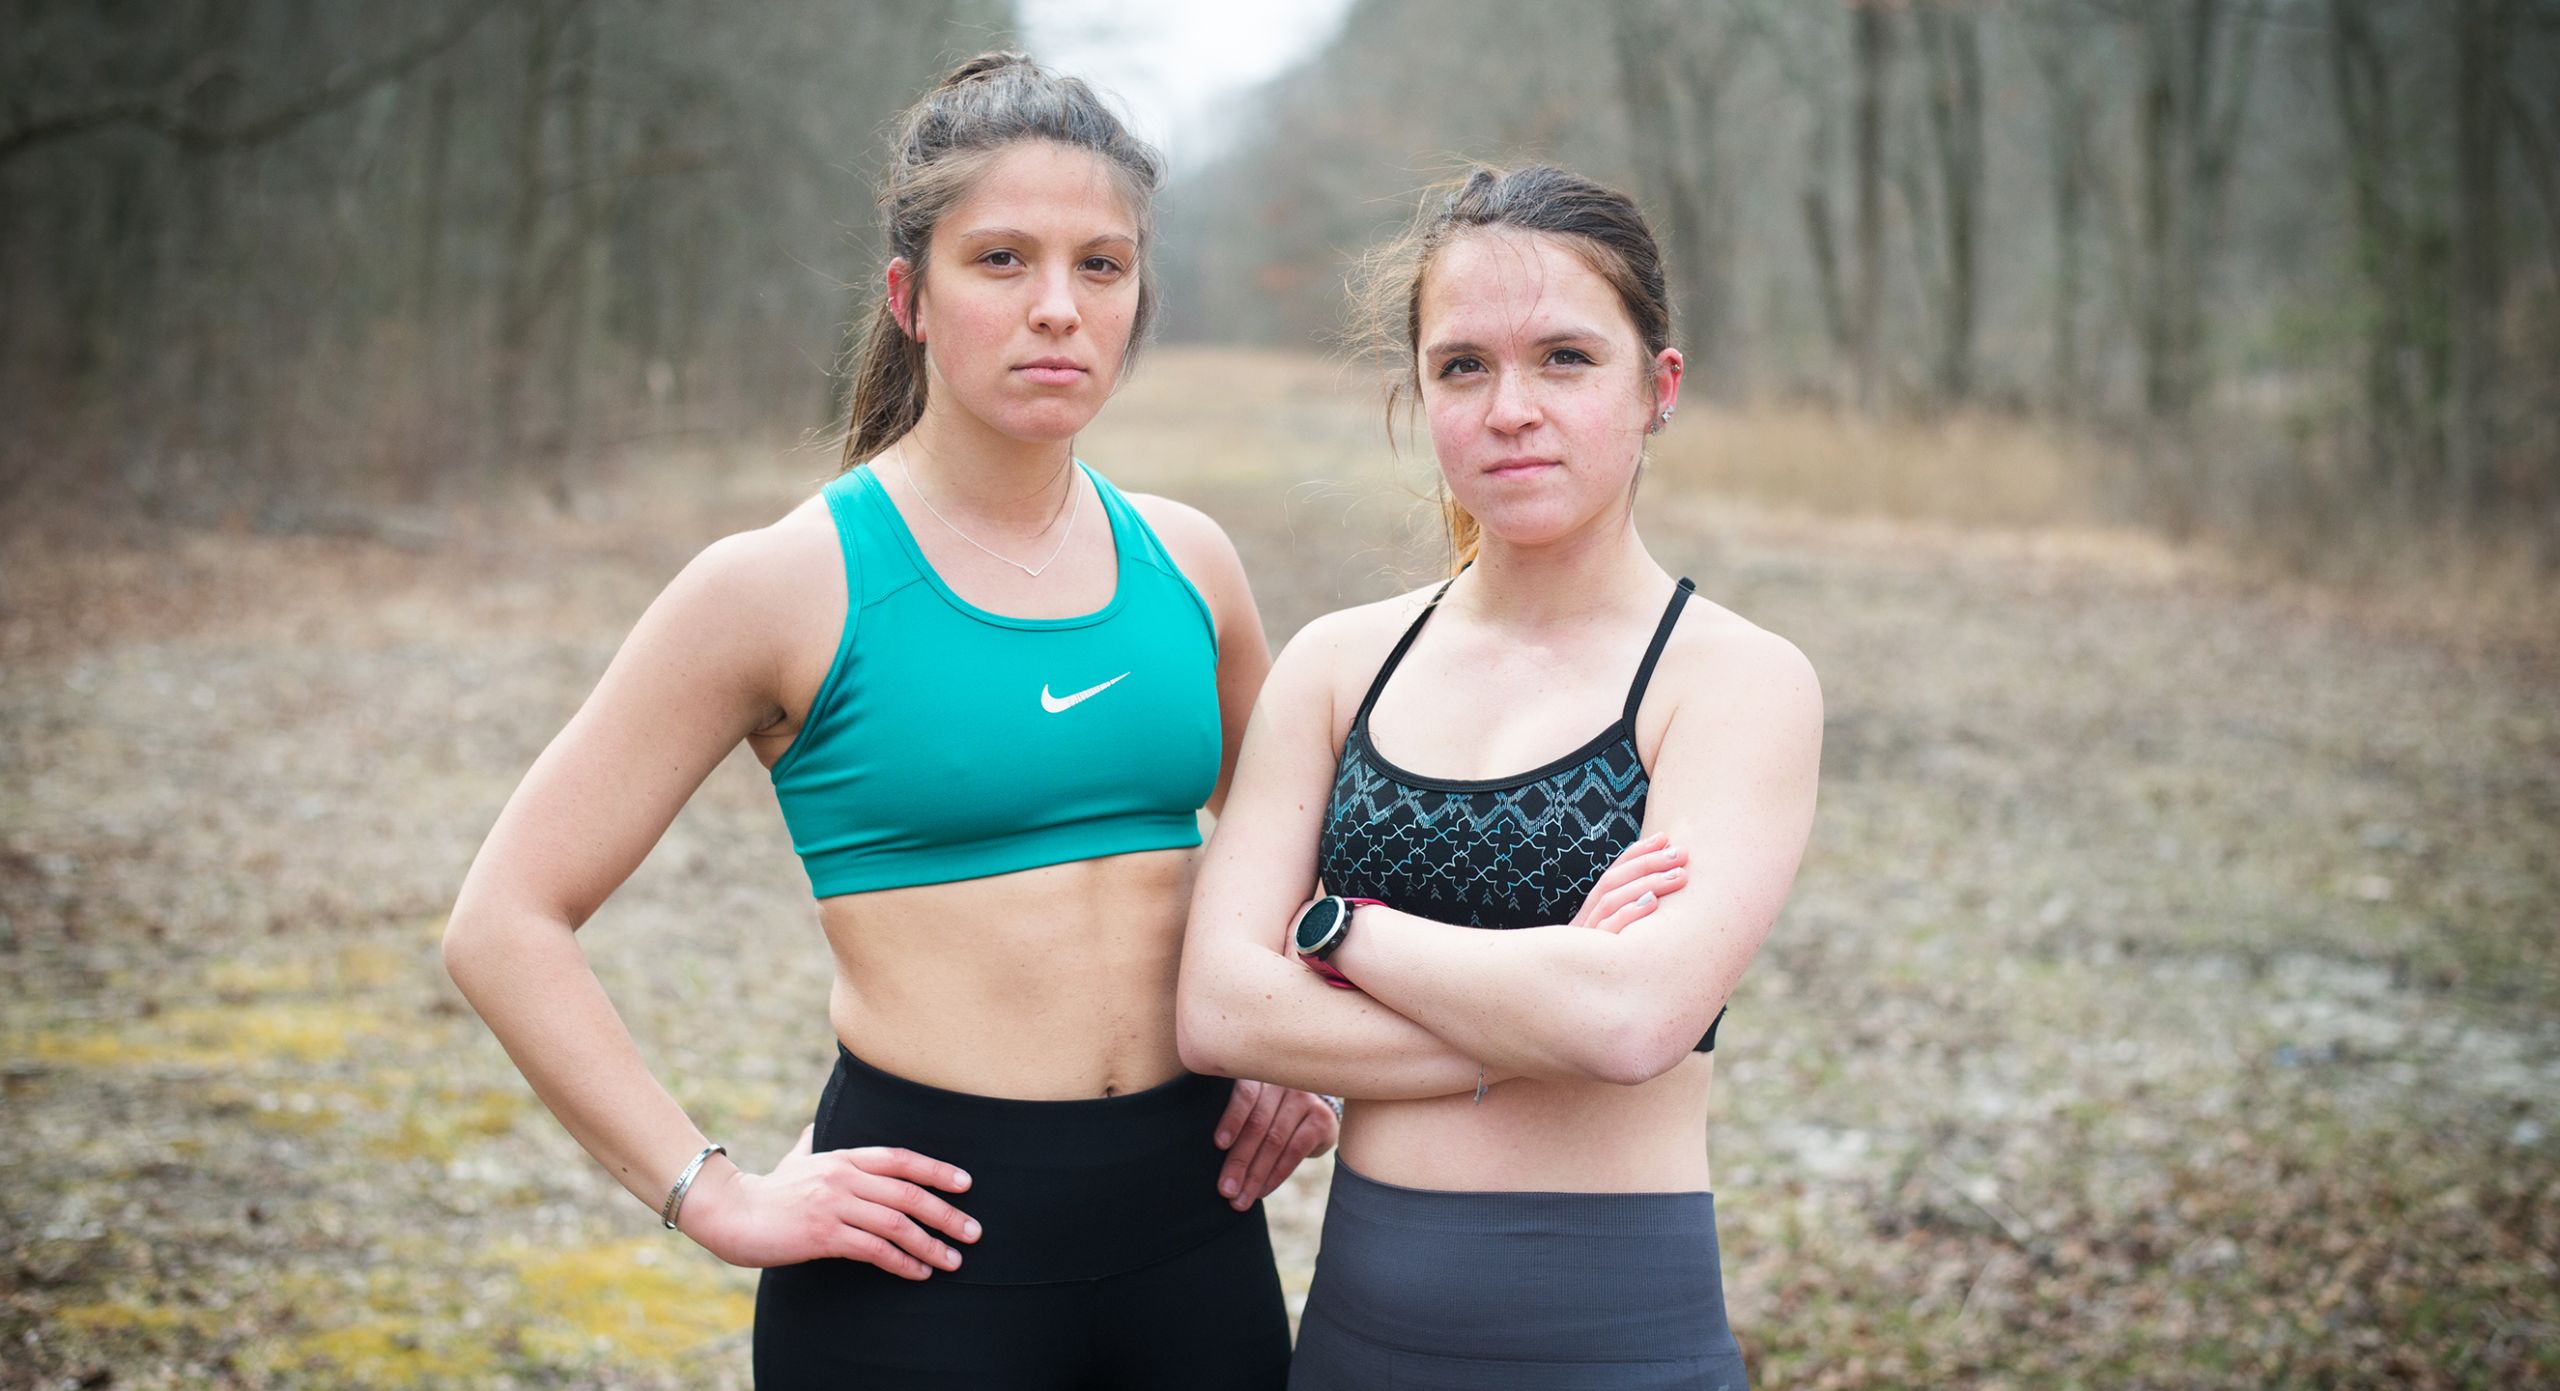 Sports Bra Outrage And A Fight Over Everyday Sexism The